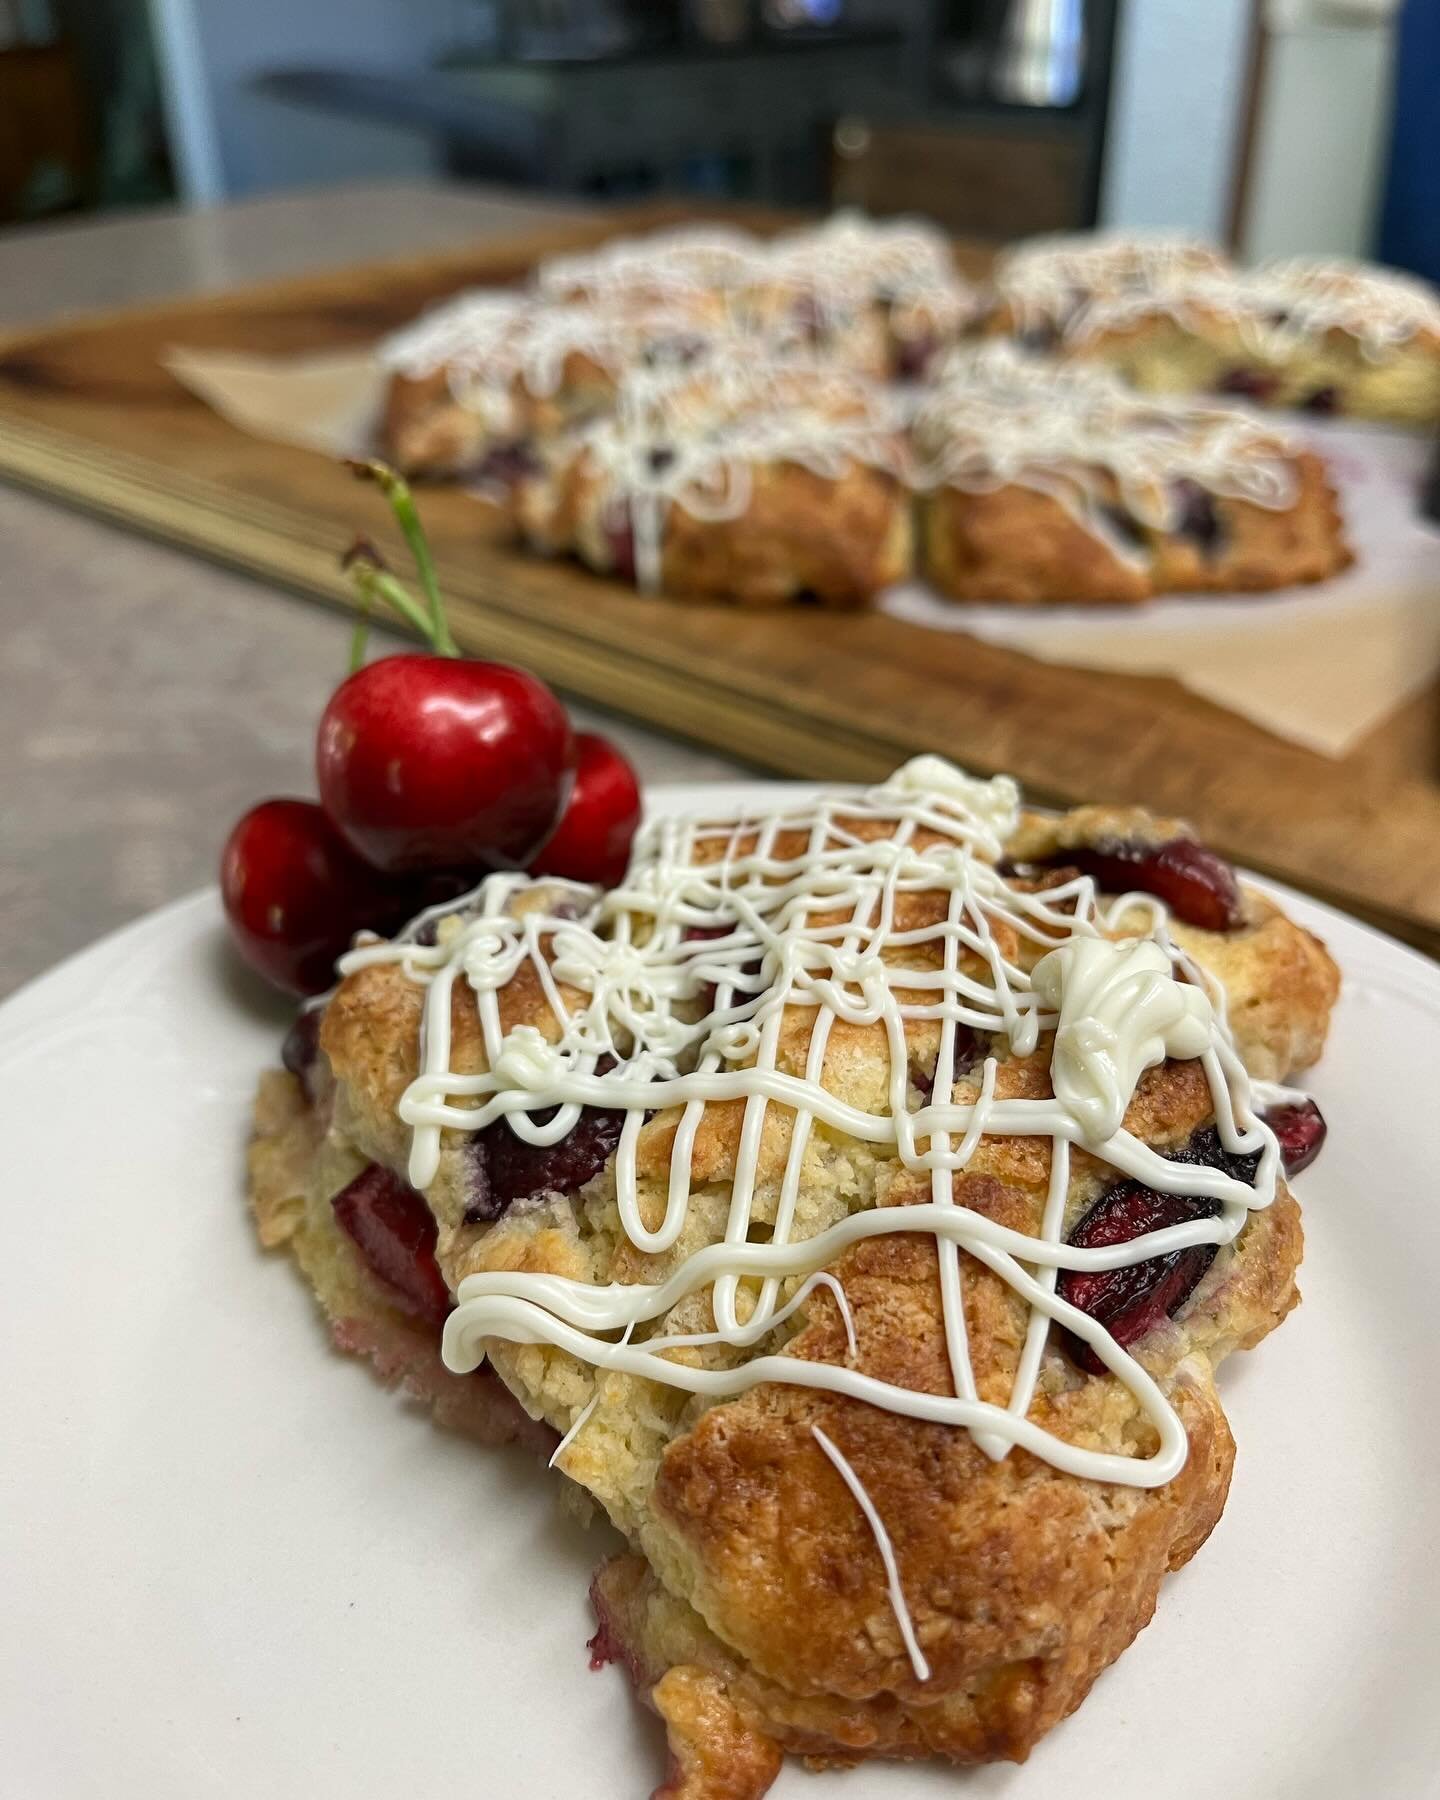 I&rsquo;ve picked a lot of blueberries and cherries over the last week at my favorite local u-pick place. Many of the cherries and blueberries have ended up in my freezer. But I did make myself some cherry scones for Mother&rsquo;s Day, and a blueber